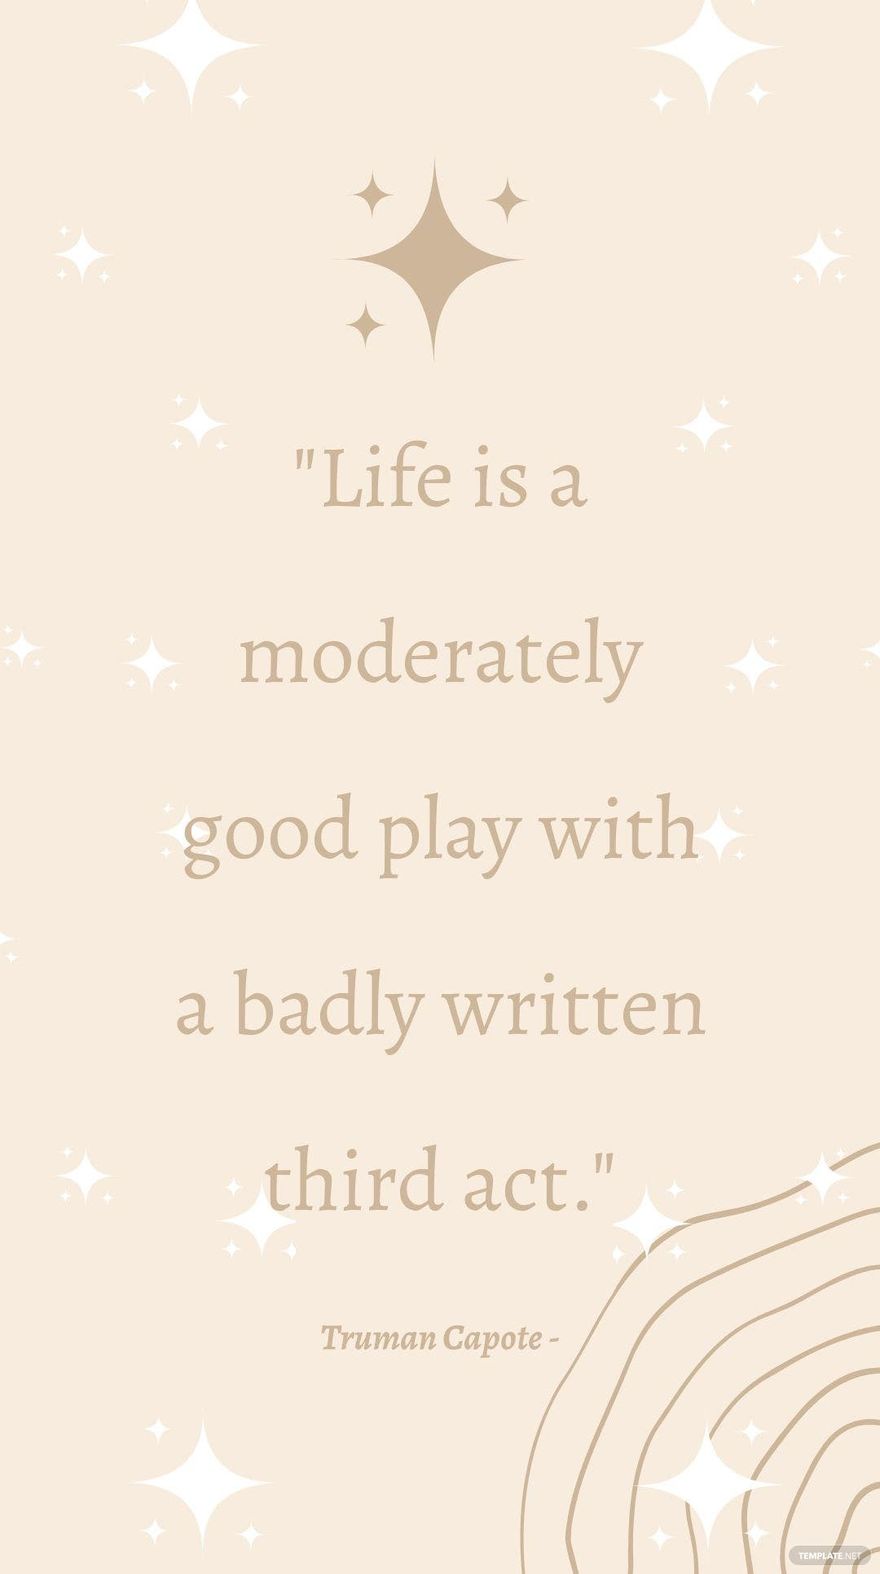 Truman Capote - Life is a moderately good play with a badly written third act.